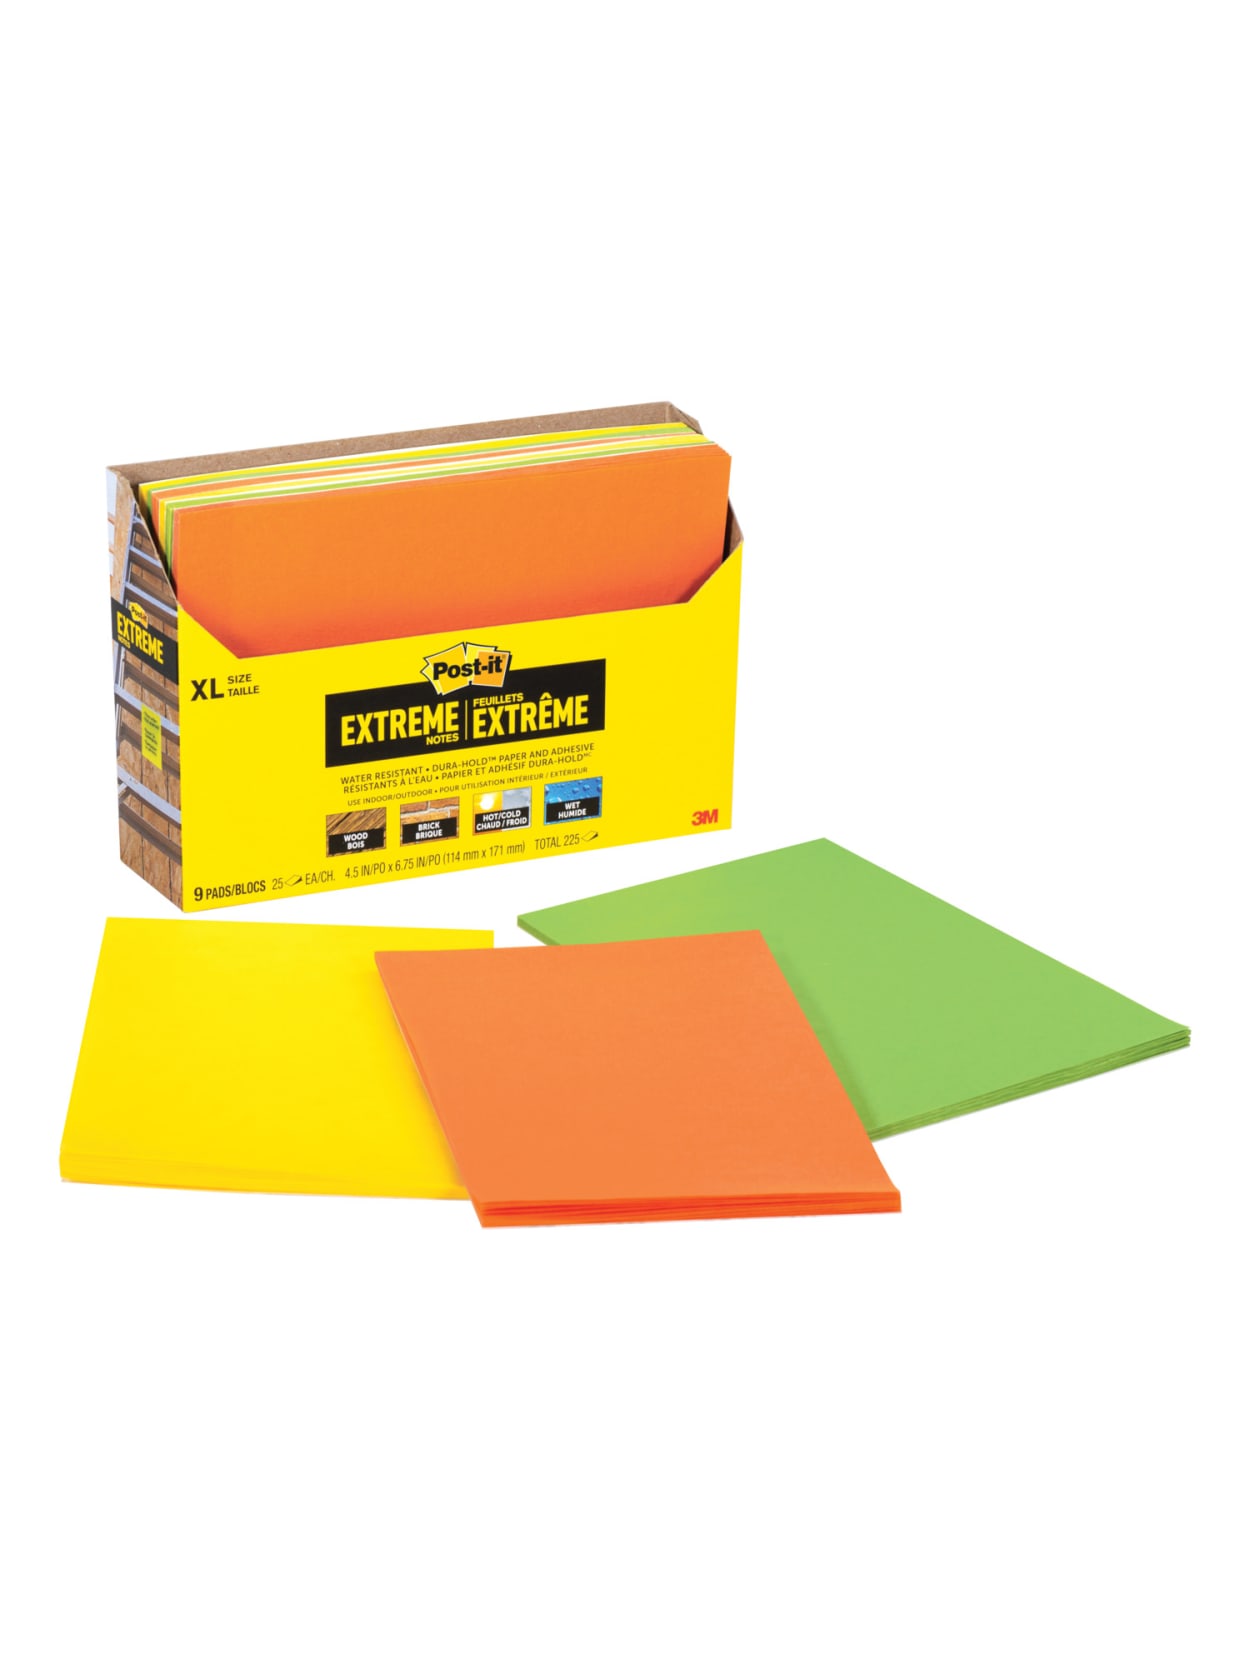 Orange/Green 2 Pads 114 mm x 171 mm Post-it Extreme Notes Yellow/Green 